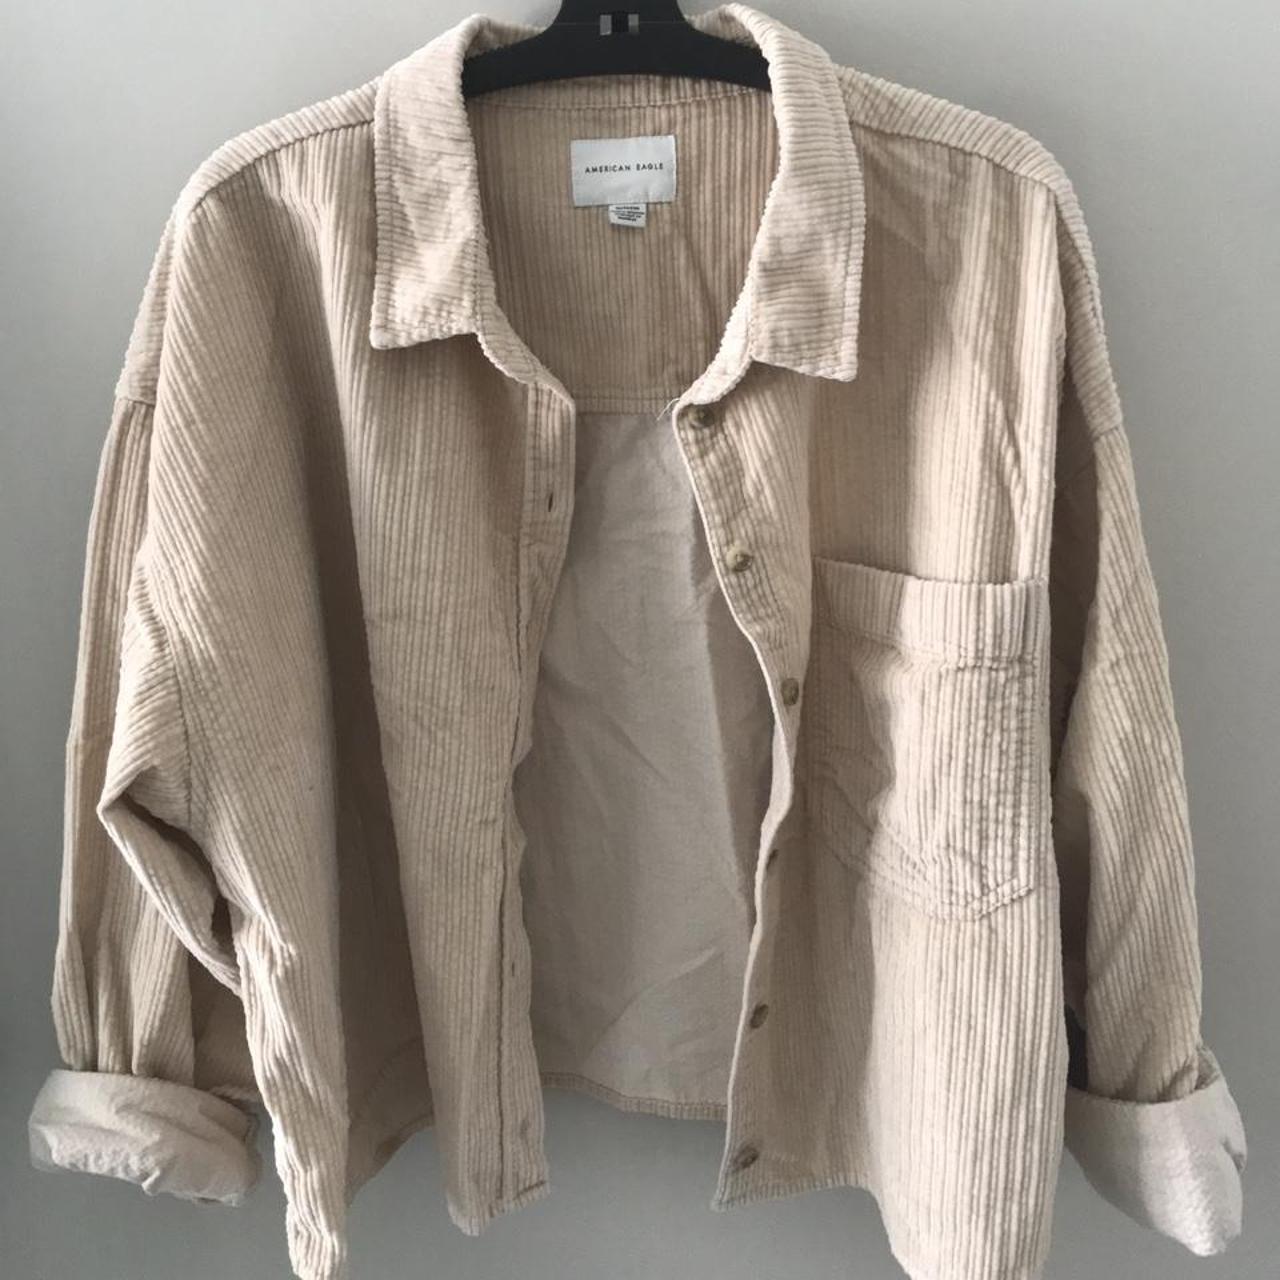 American Eagle Outfitters corduroy blouse - Depop